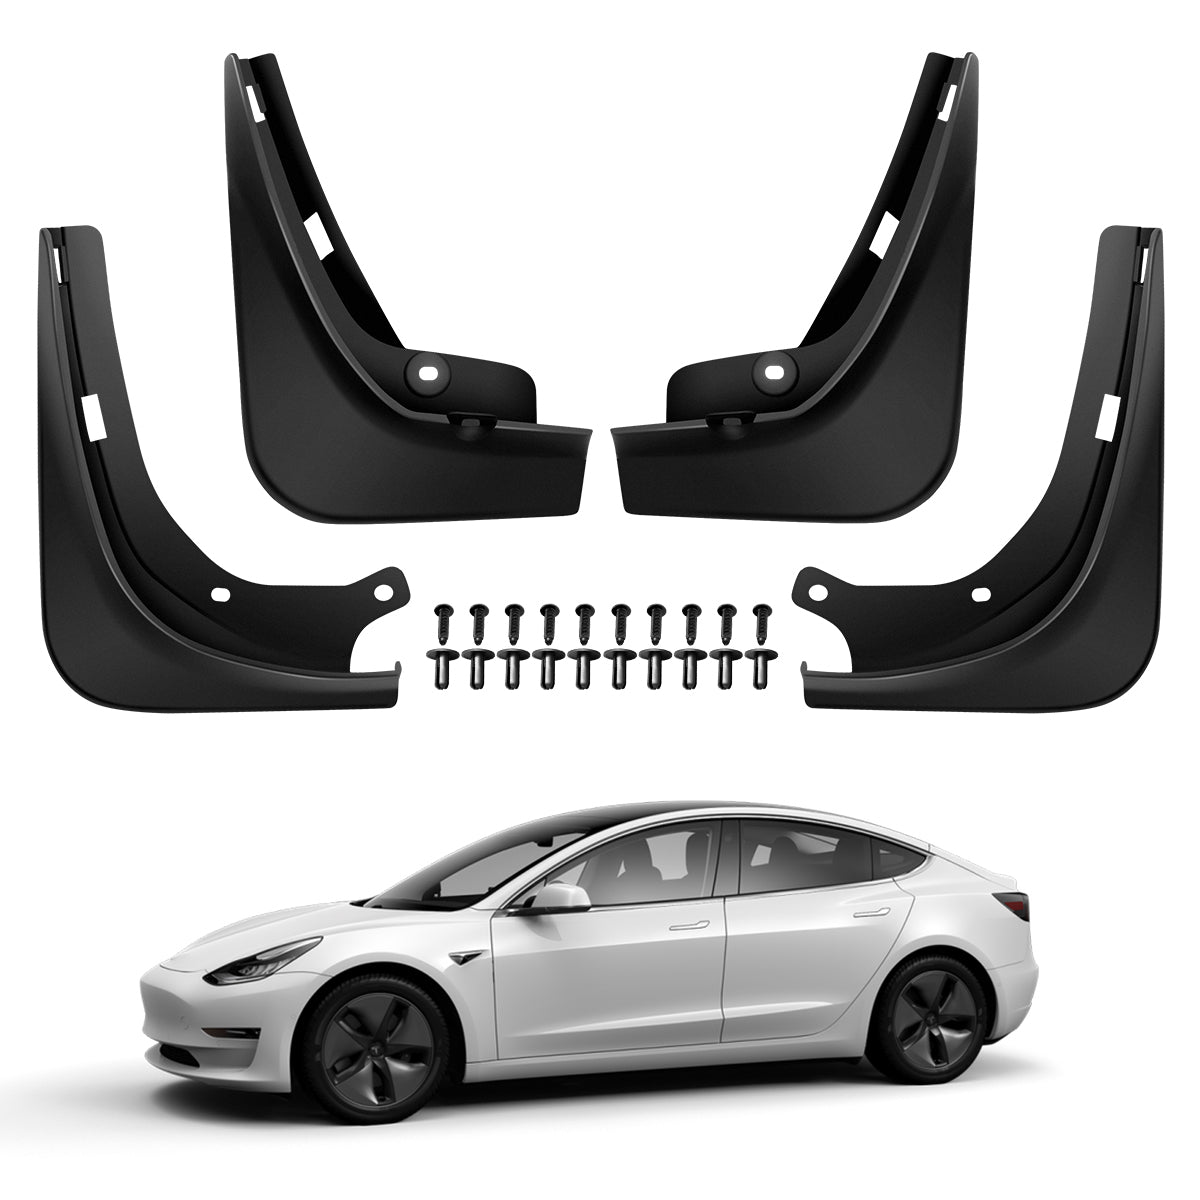 Lasfit Mud Flaps for Tesla Model 3 2017-2023 No Drilling Required Splash Guards Matte Fender Upgraded PP Material Accessories Fit 5 Seater Car - Set